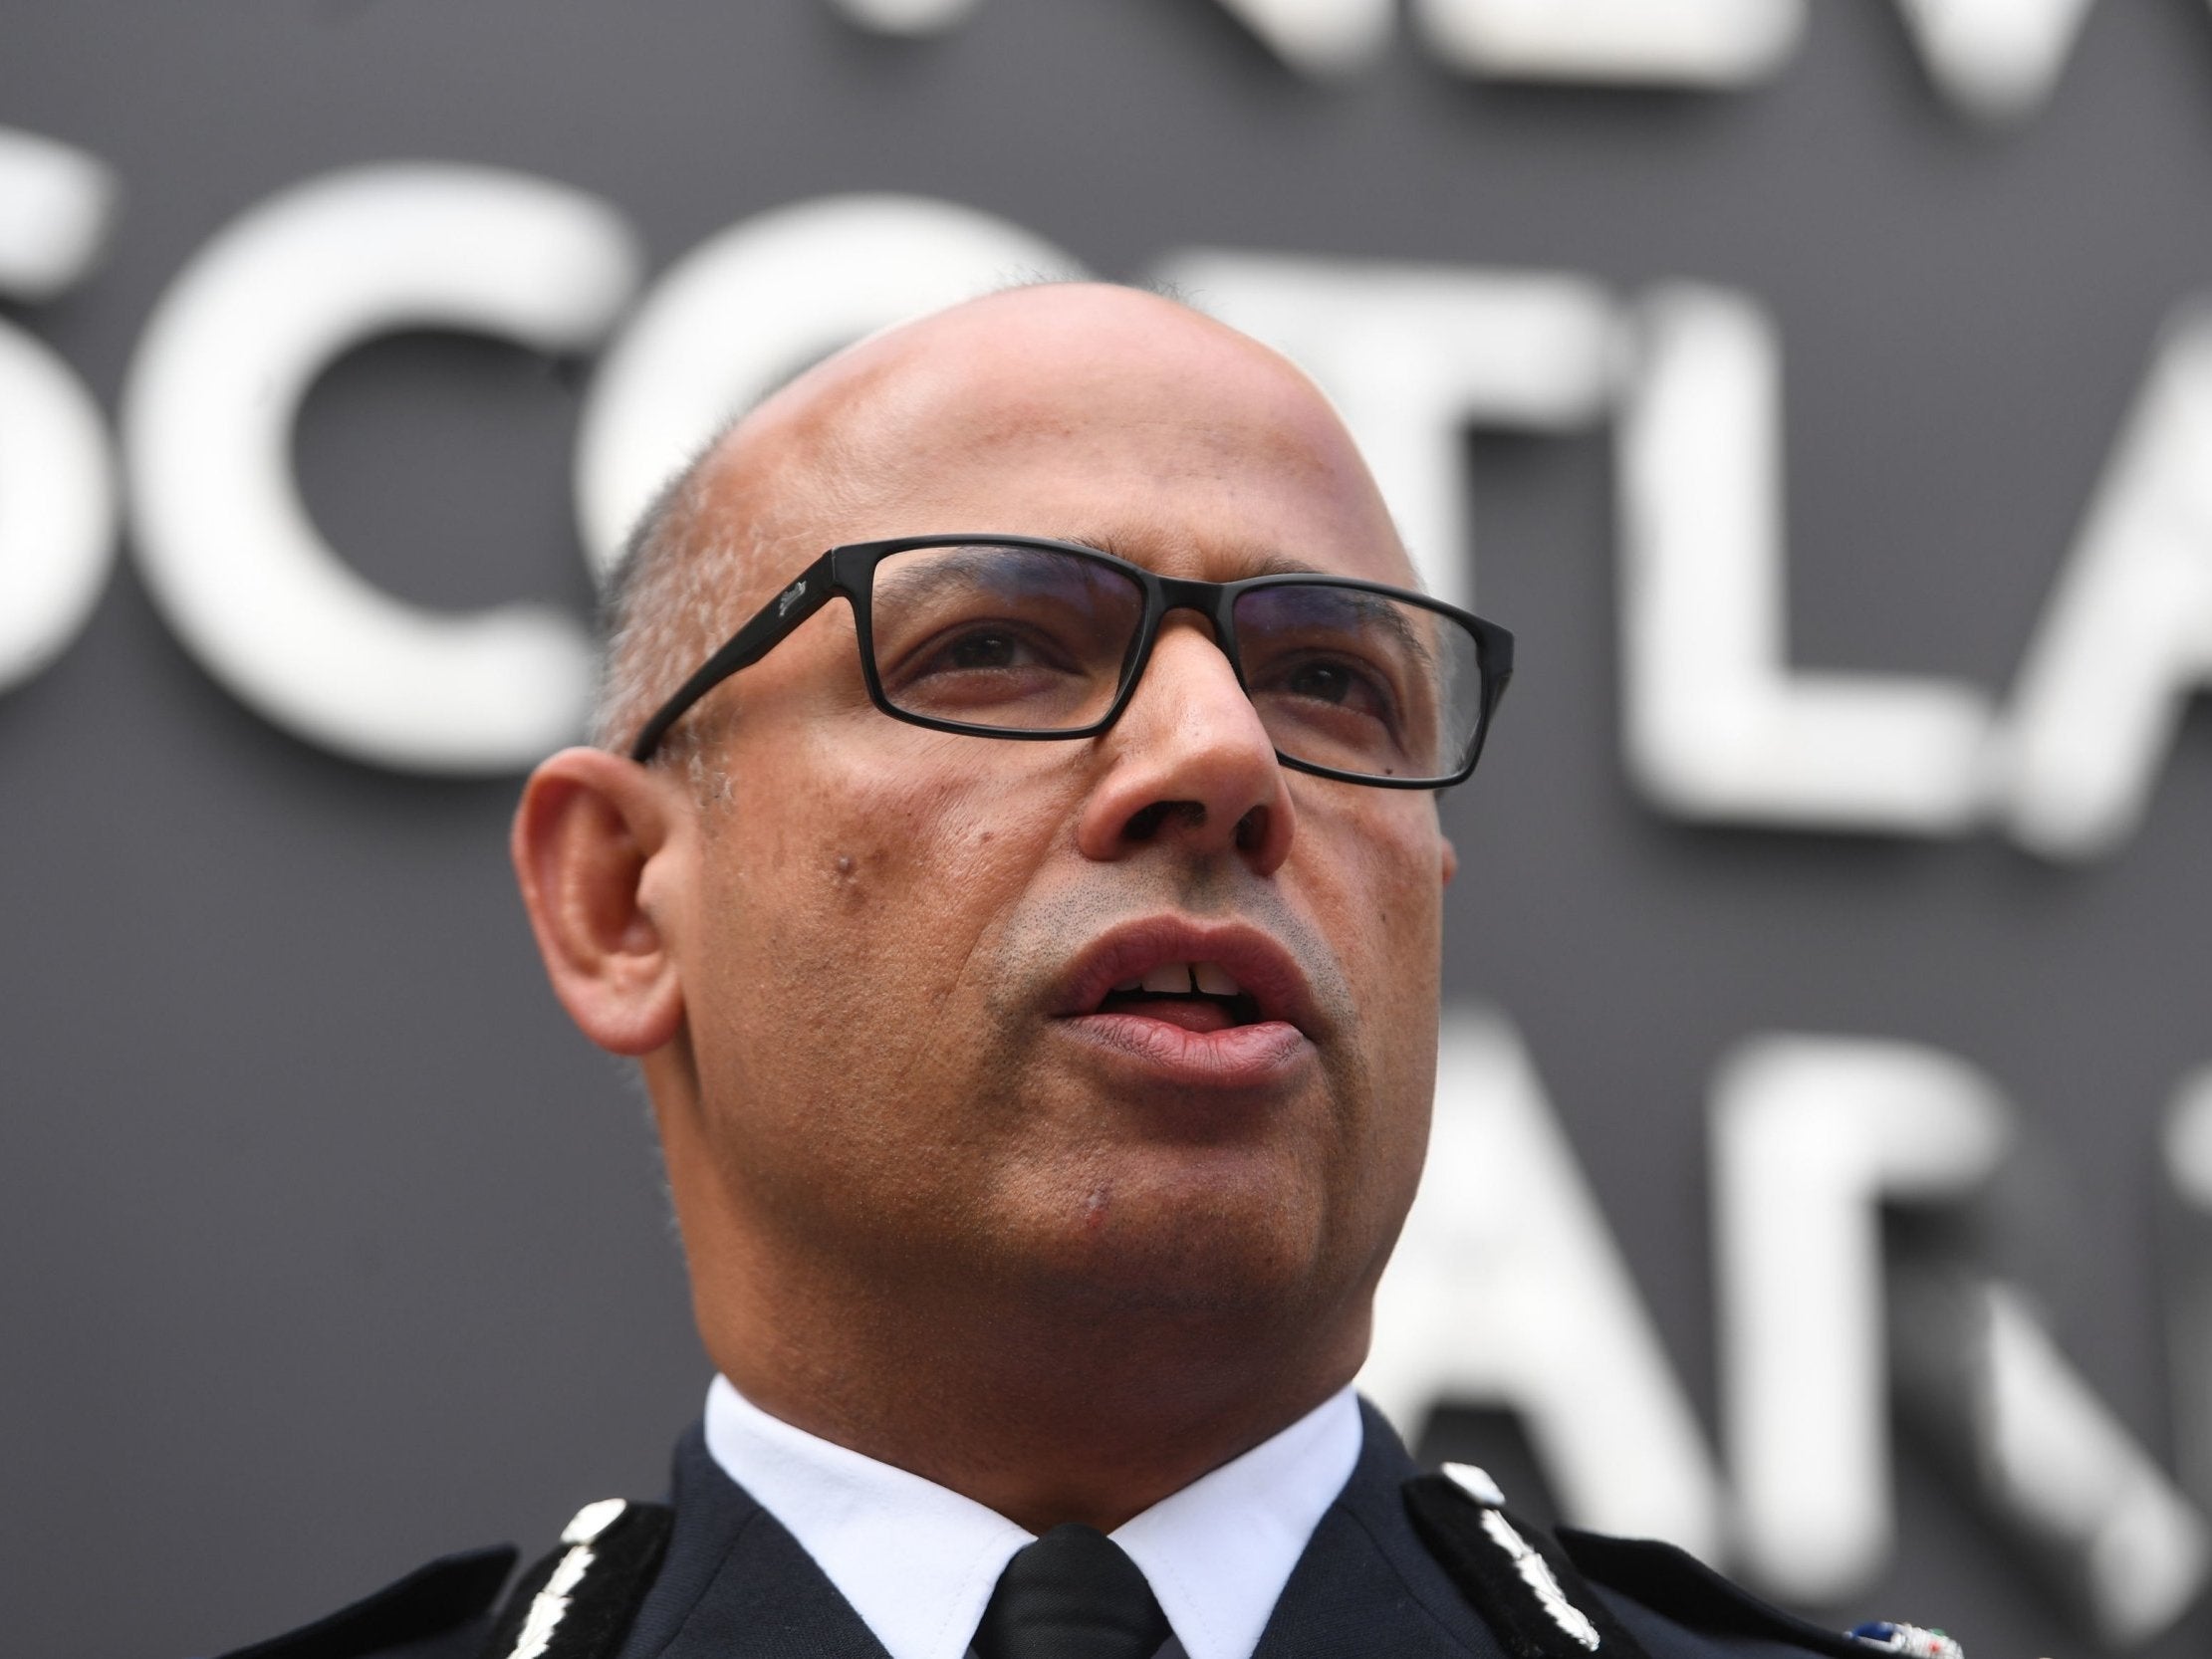 Metropolitan Police Assistant Commissioner Neil Basu is the head of UK counterterror policing